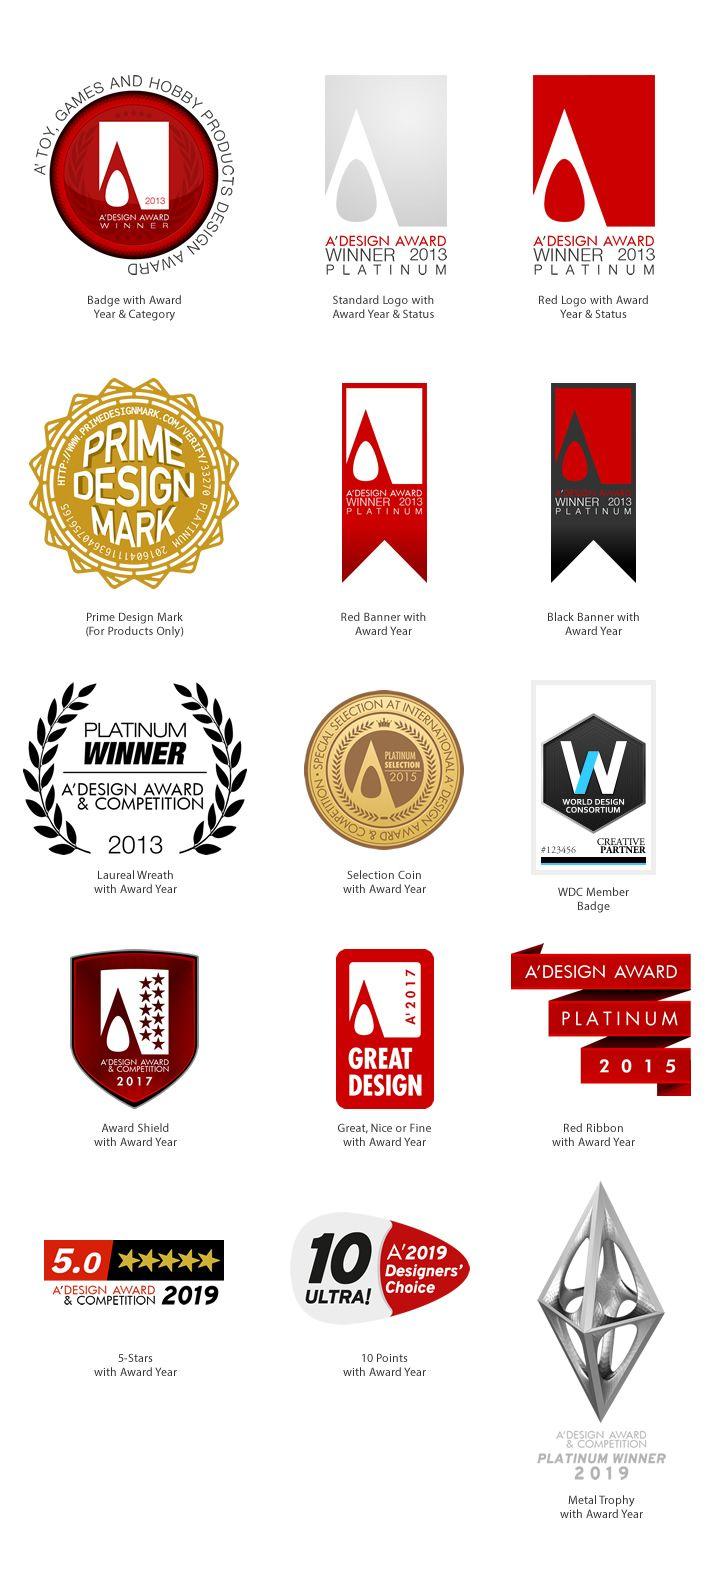 Winner Logo - A' Design Award and Competition Logo and Badges